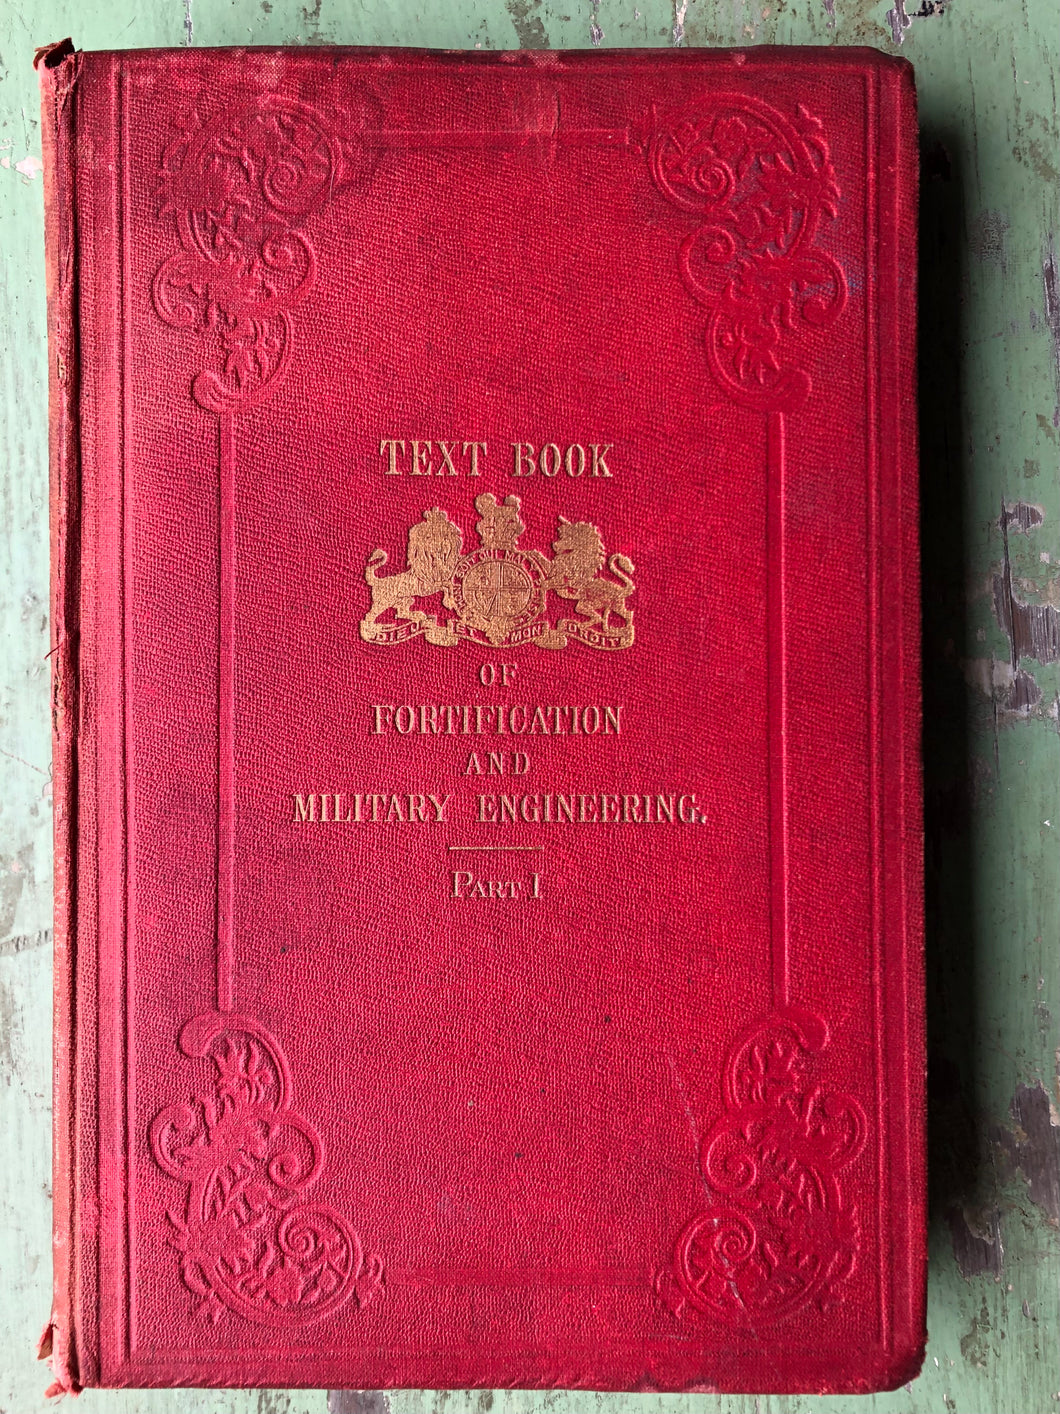 Text Book of Fortification and Military Engineering, for Use at the Royal Military Academy, Woolwich. Part I.